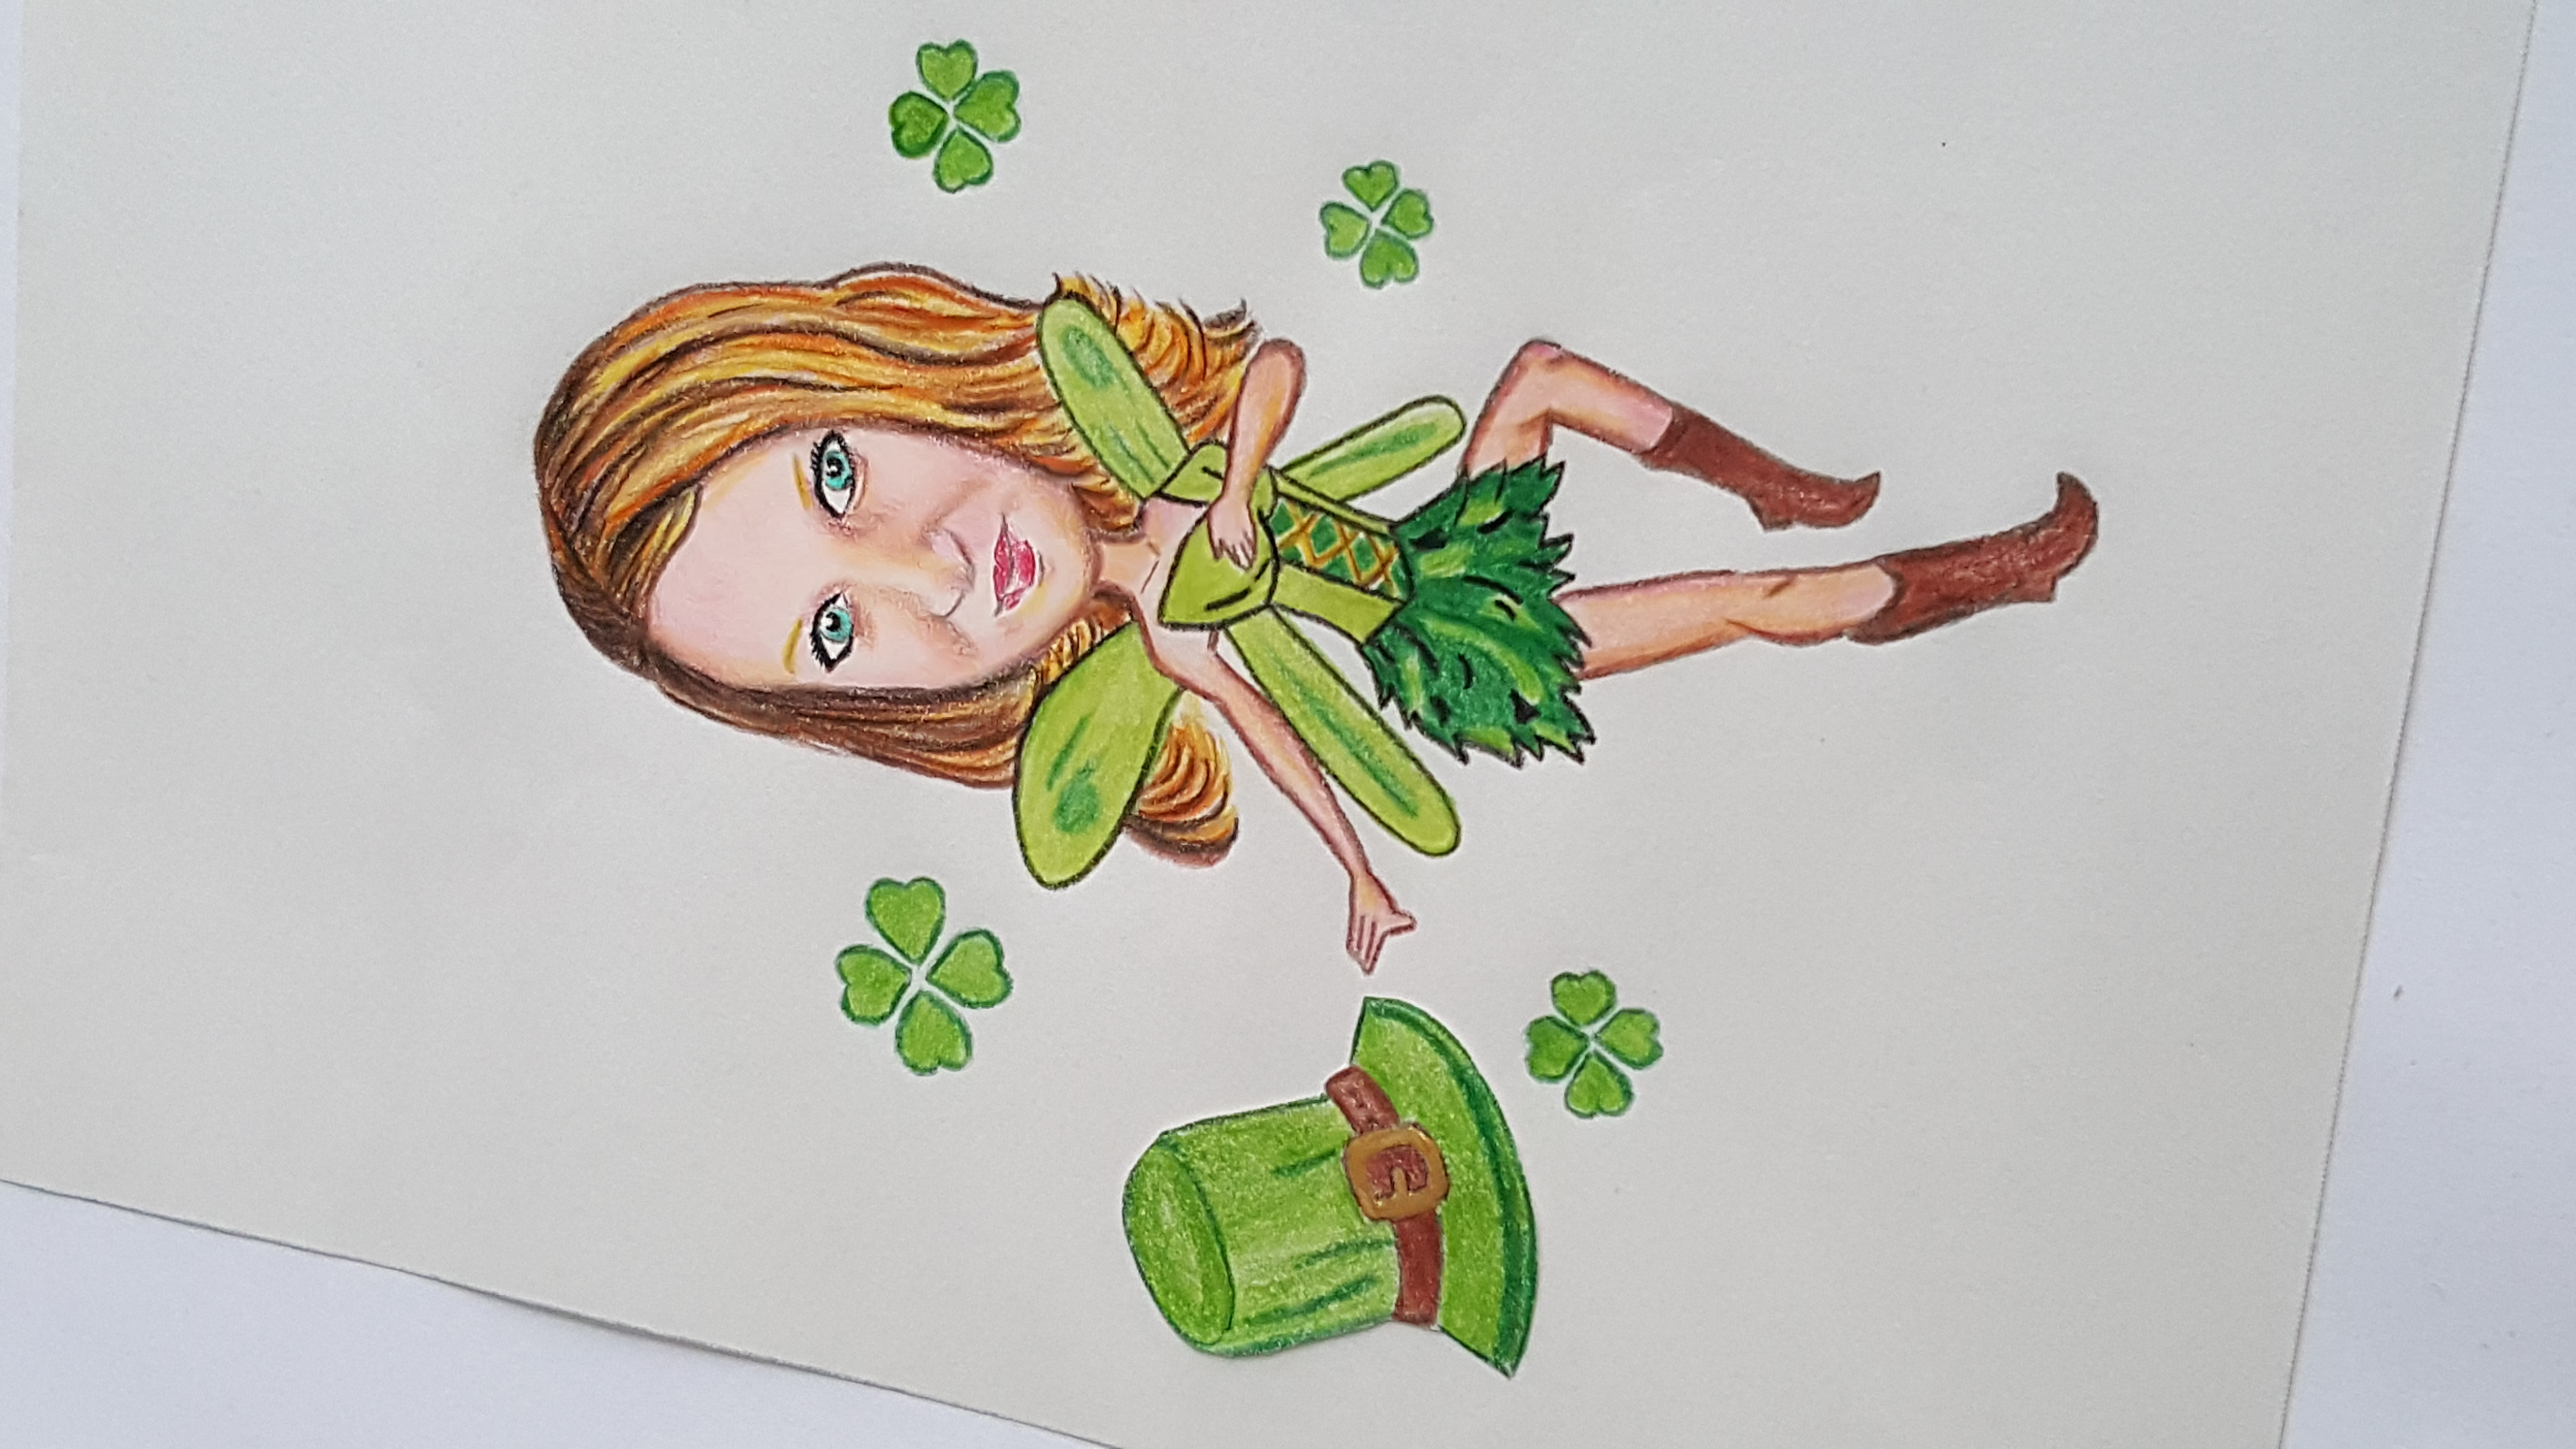 How To Draw An Irish Fairy For St. Patrick's Day ☘️ 